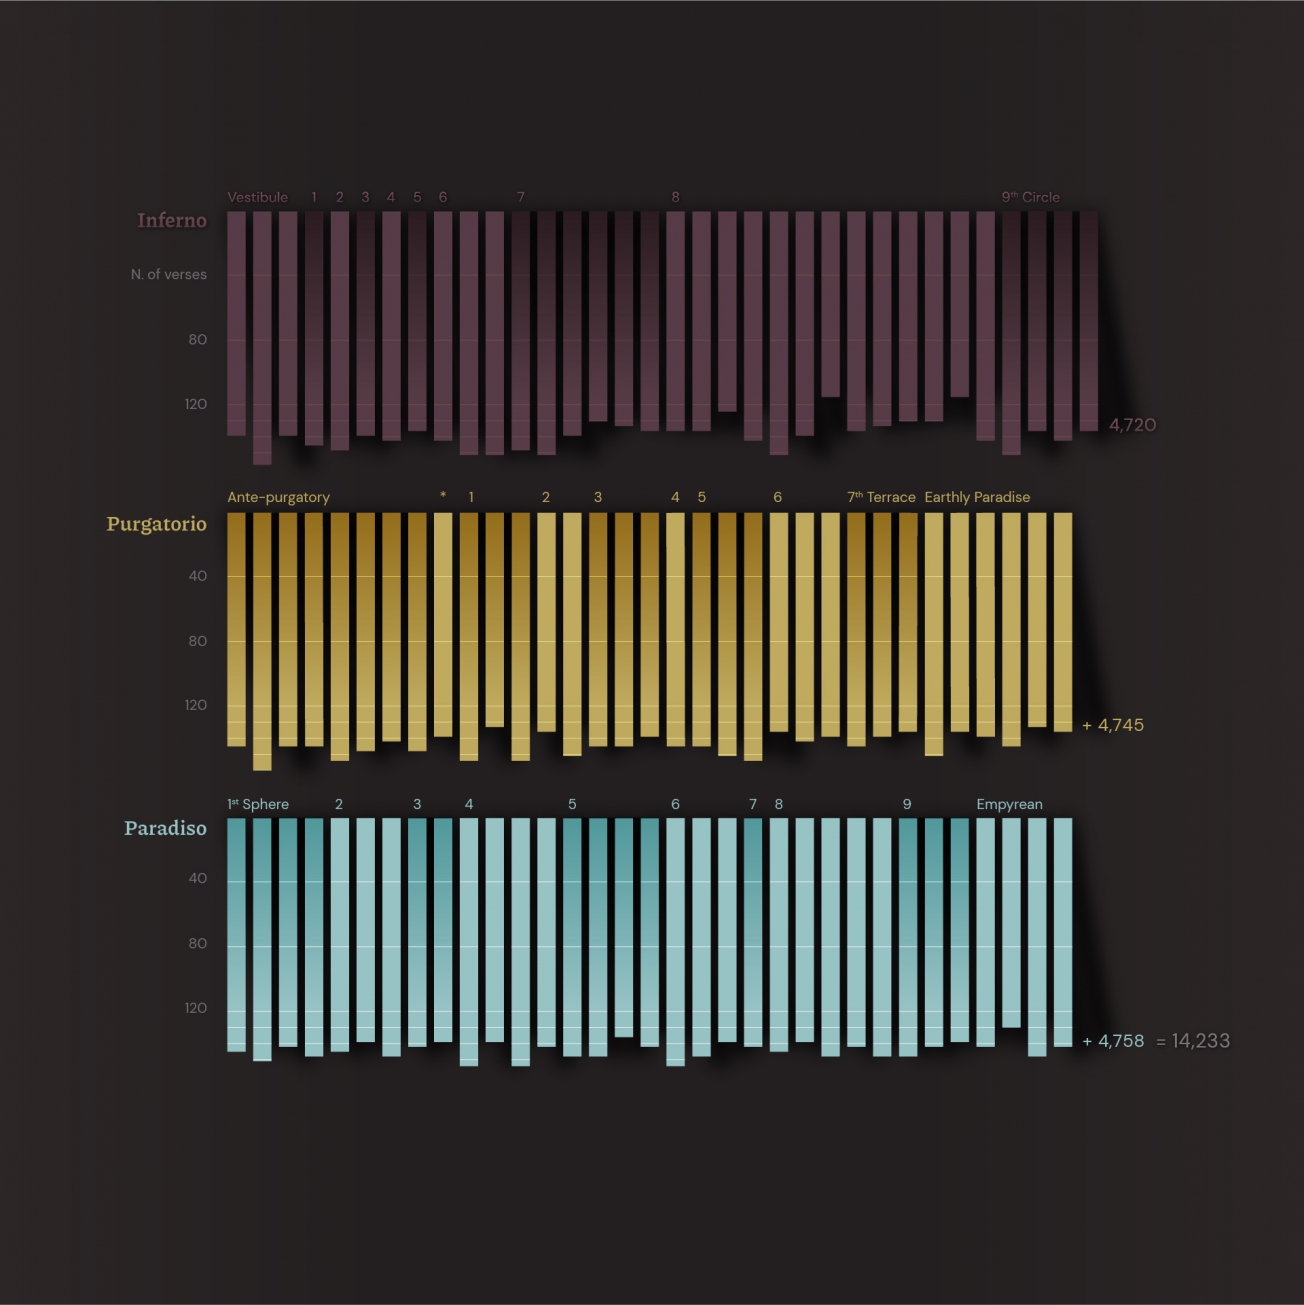 Divine Comedy structure infographic by The Visual Agency